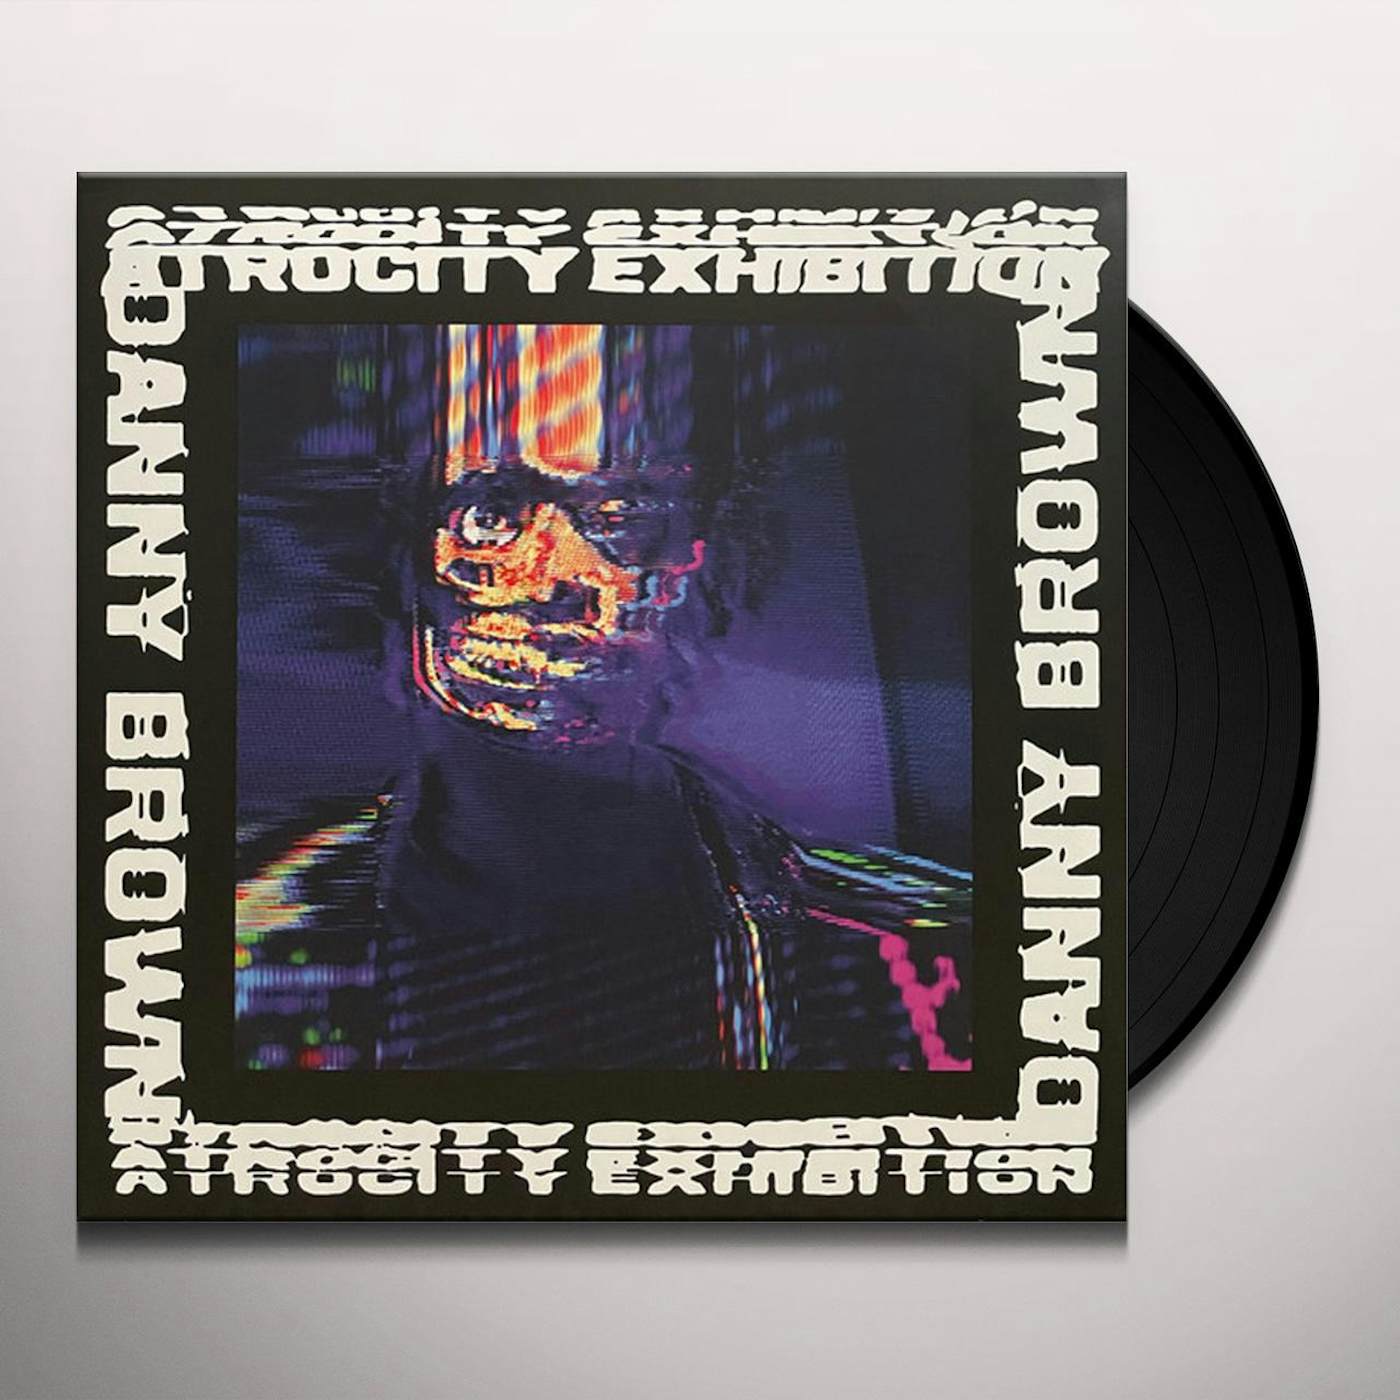 fiktion Omkostningsprocent Hick Danny Brown Atrocity Exhibition Vinyl Record